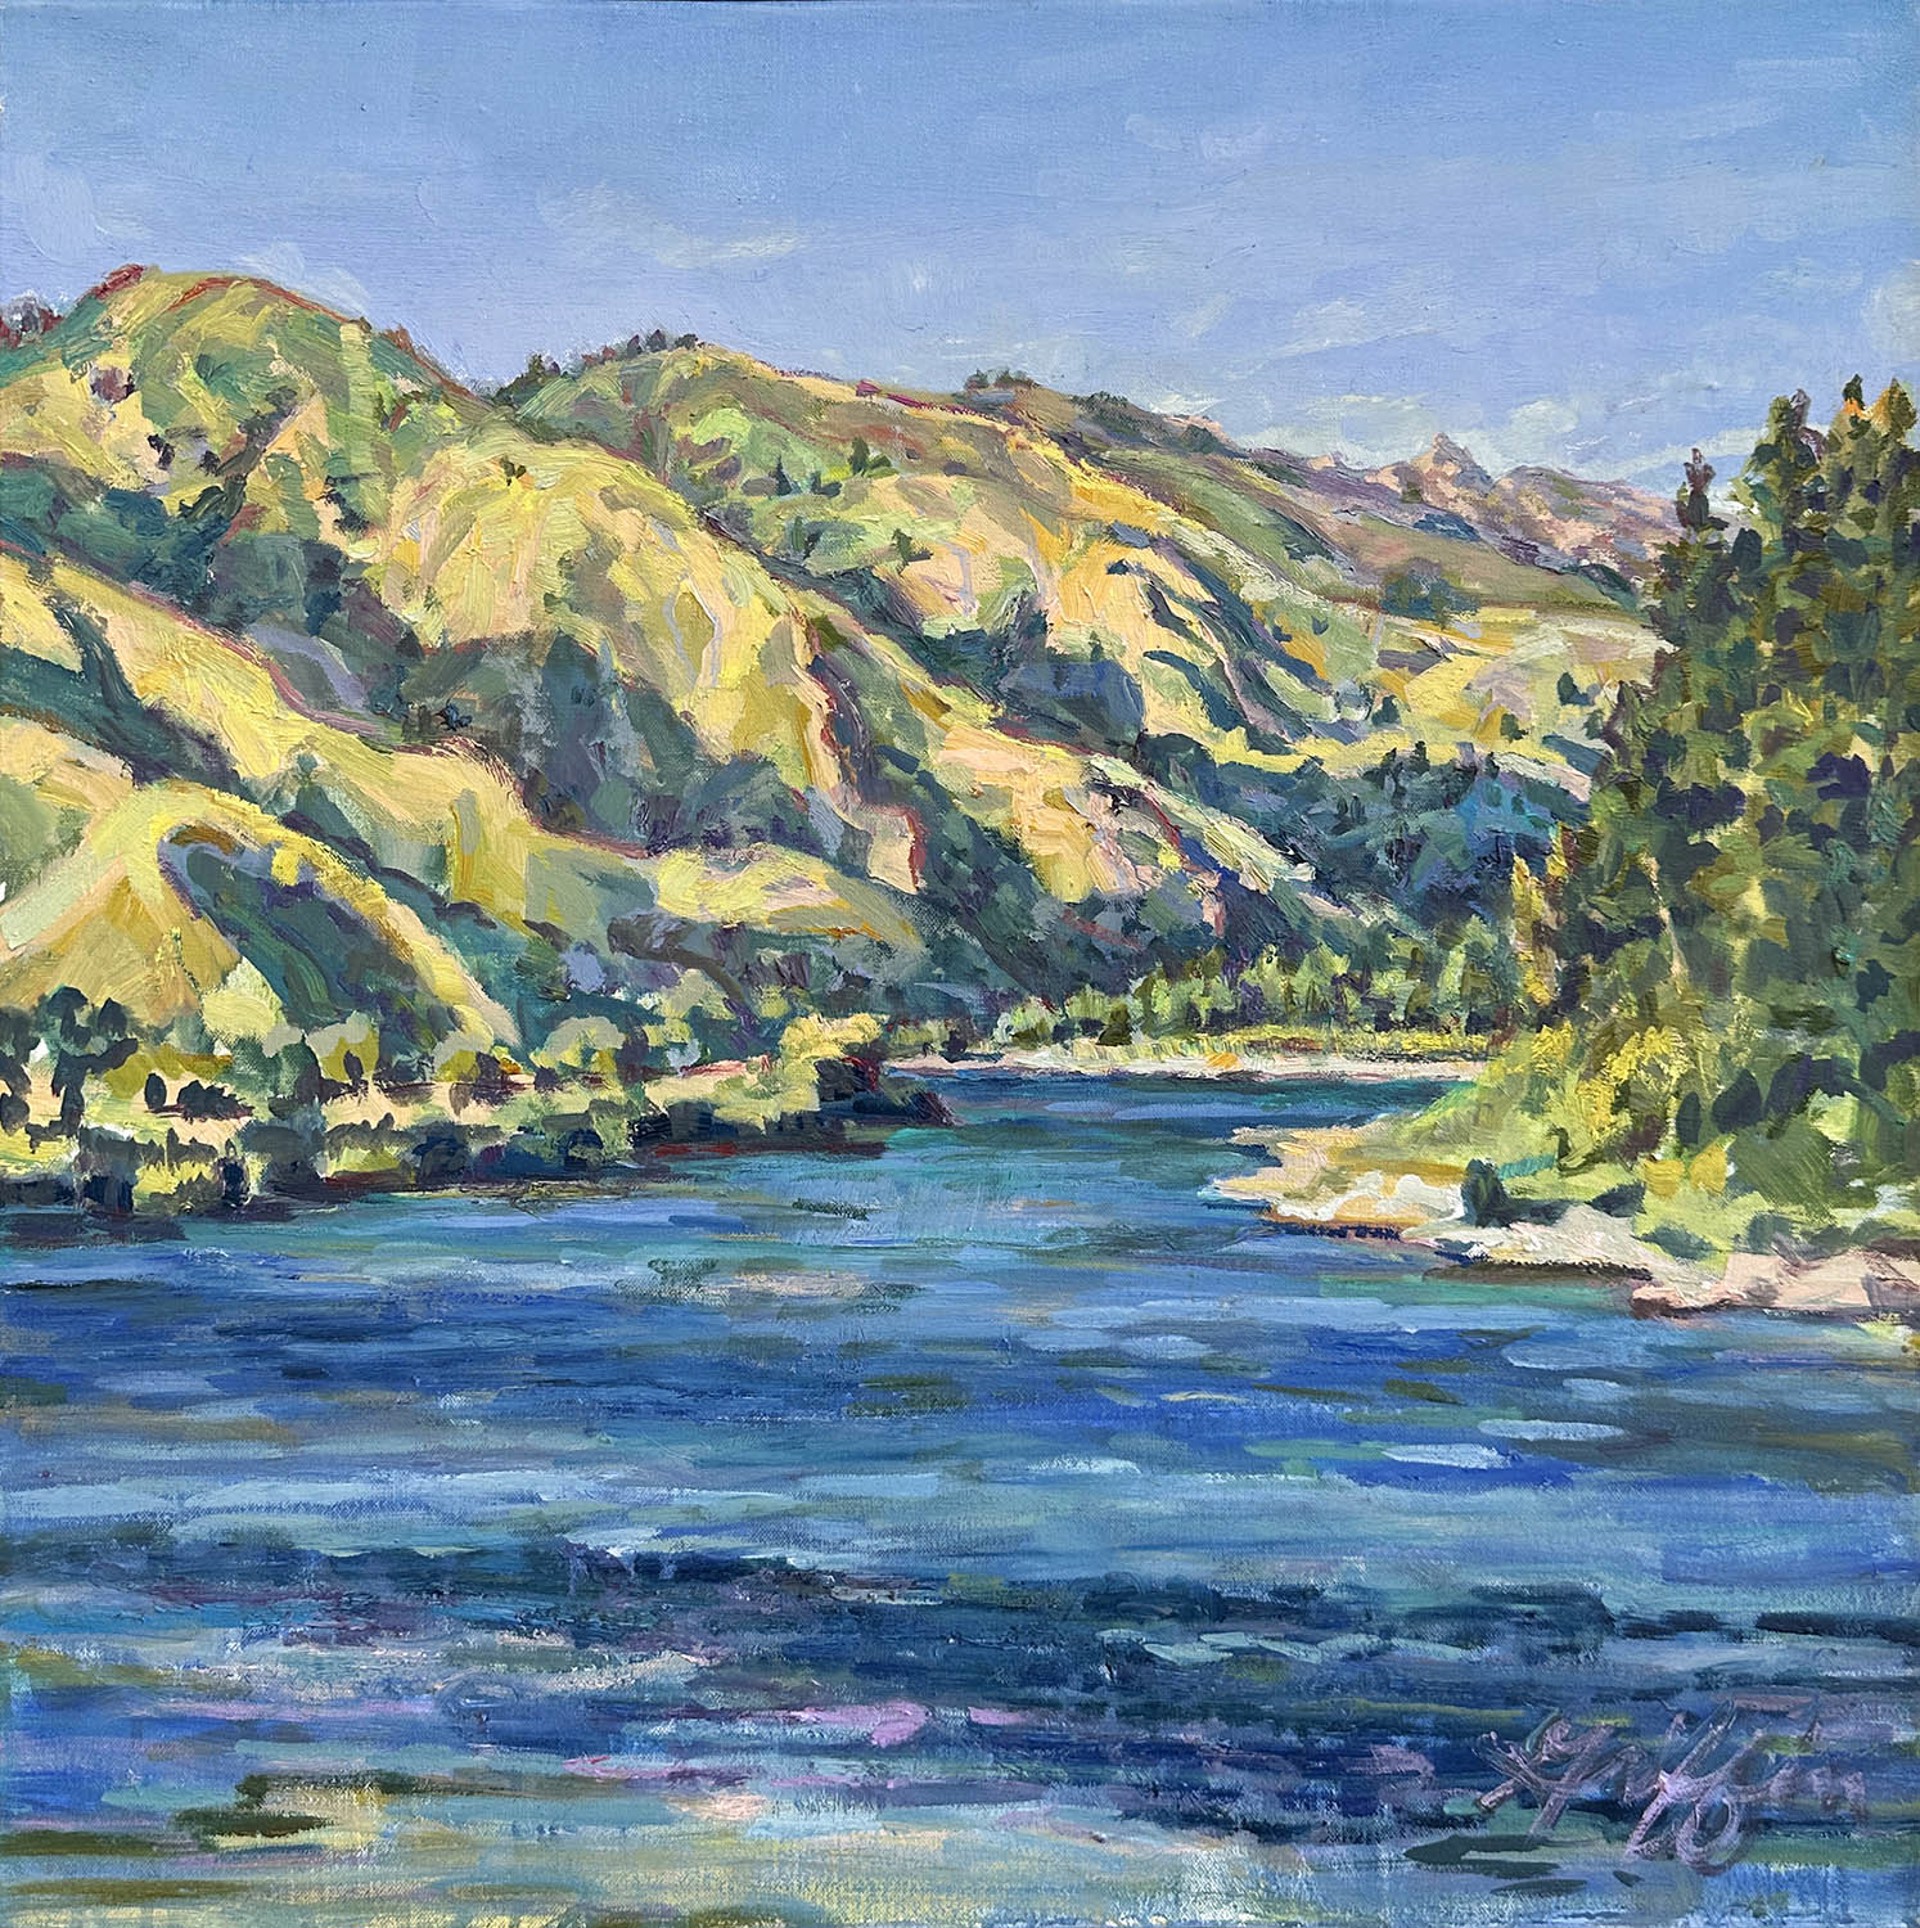 Original Oil Painting By Patricia Griffin Featuring A Landscape View From The Bank Of The Snake River In Summer